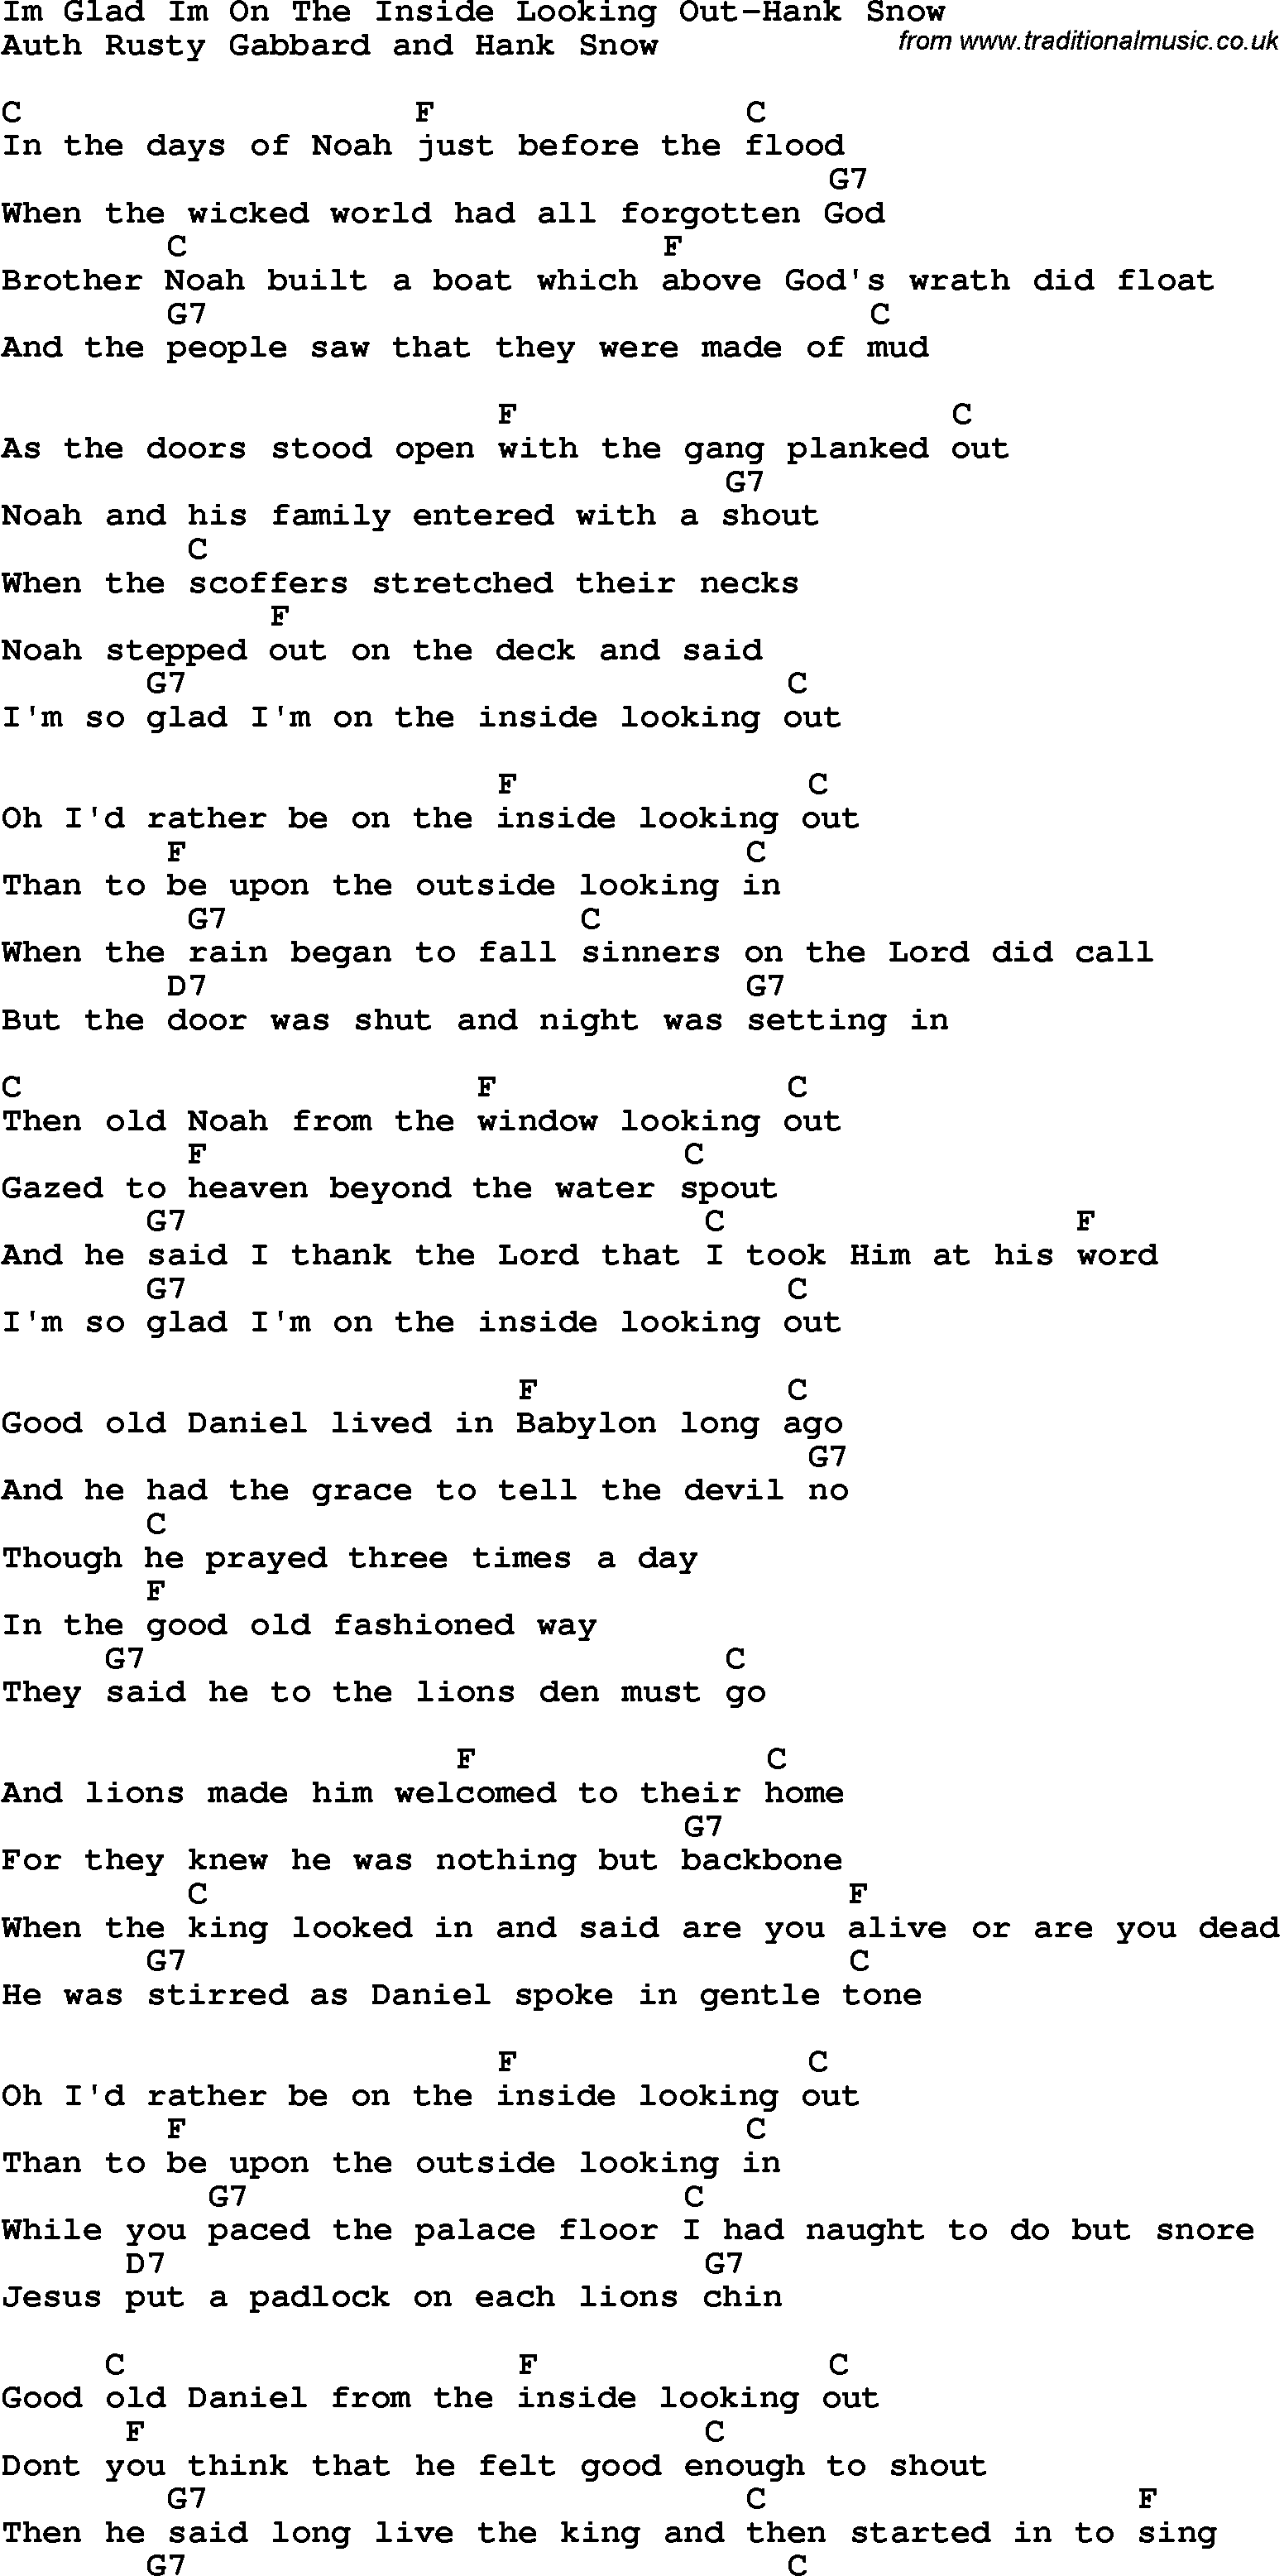 Country, Southern and Bluegrass Gospel Song I’m Glad I’m On The Inside Looking Out-Hank Snow lyrics and chords